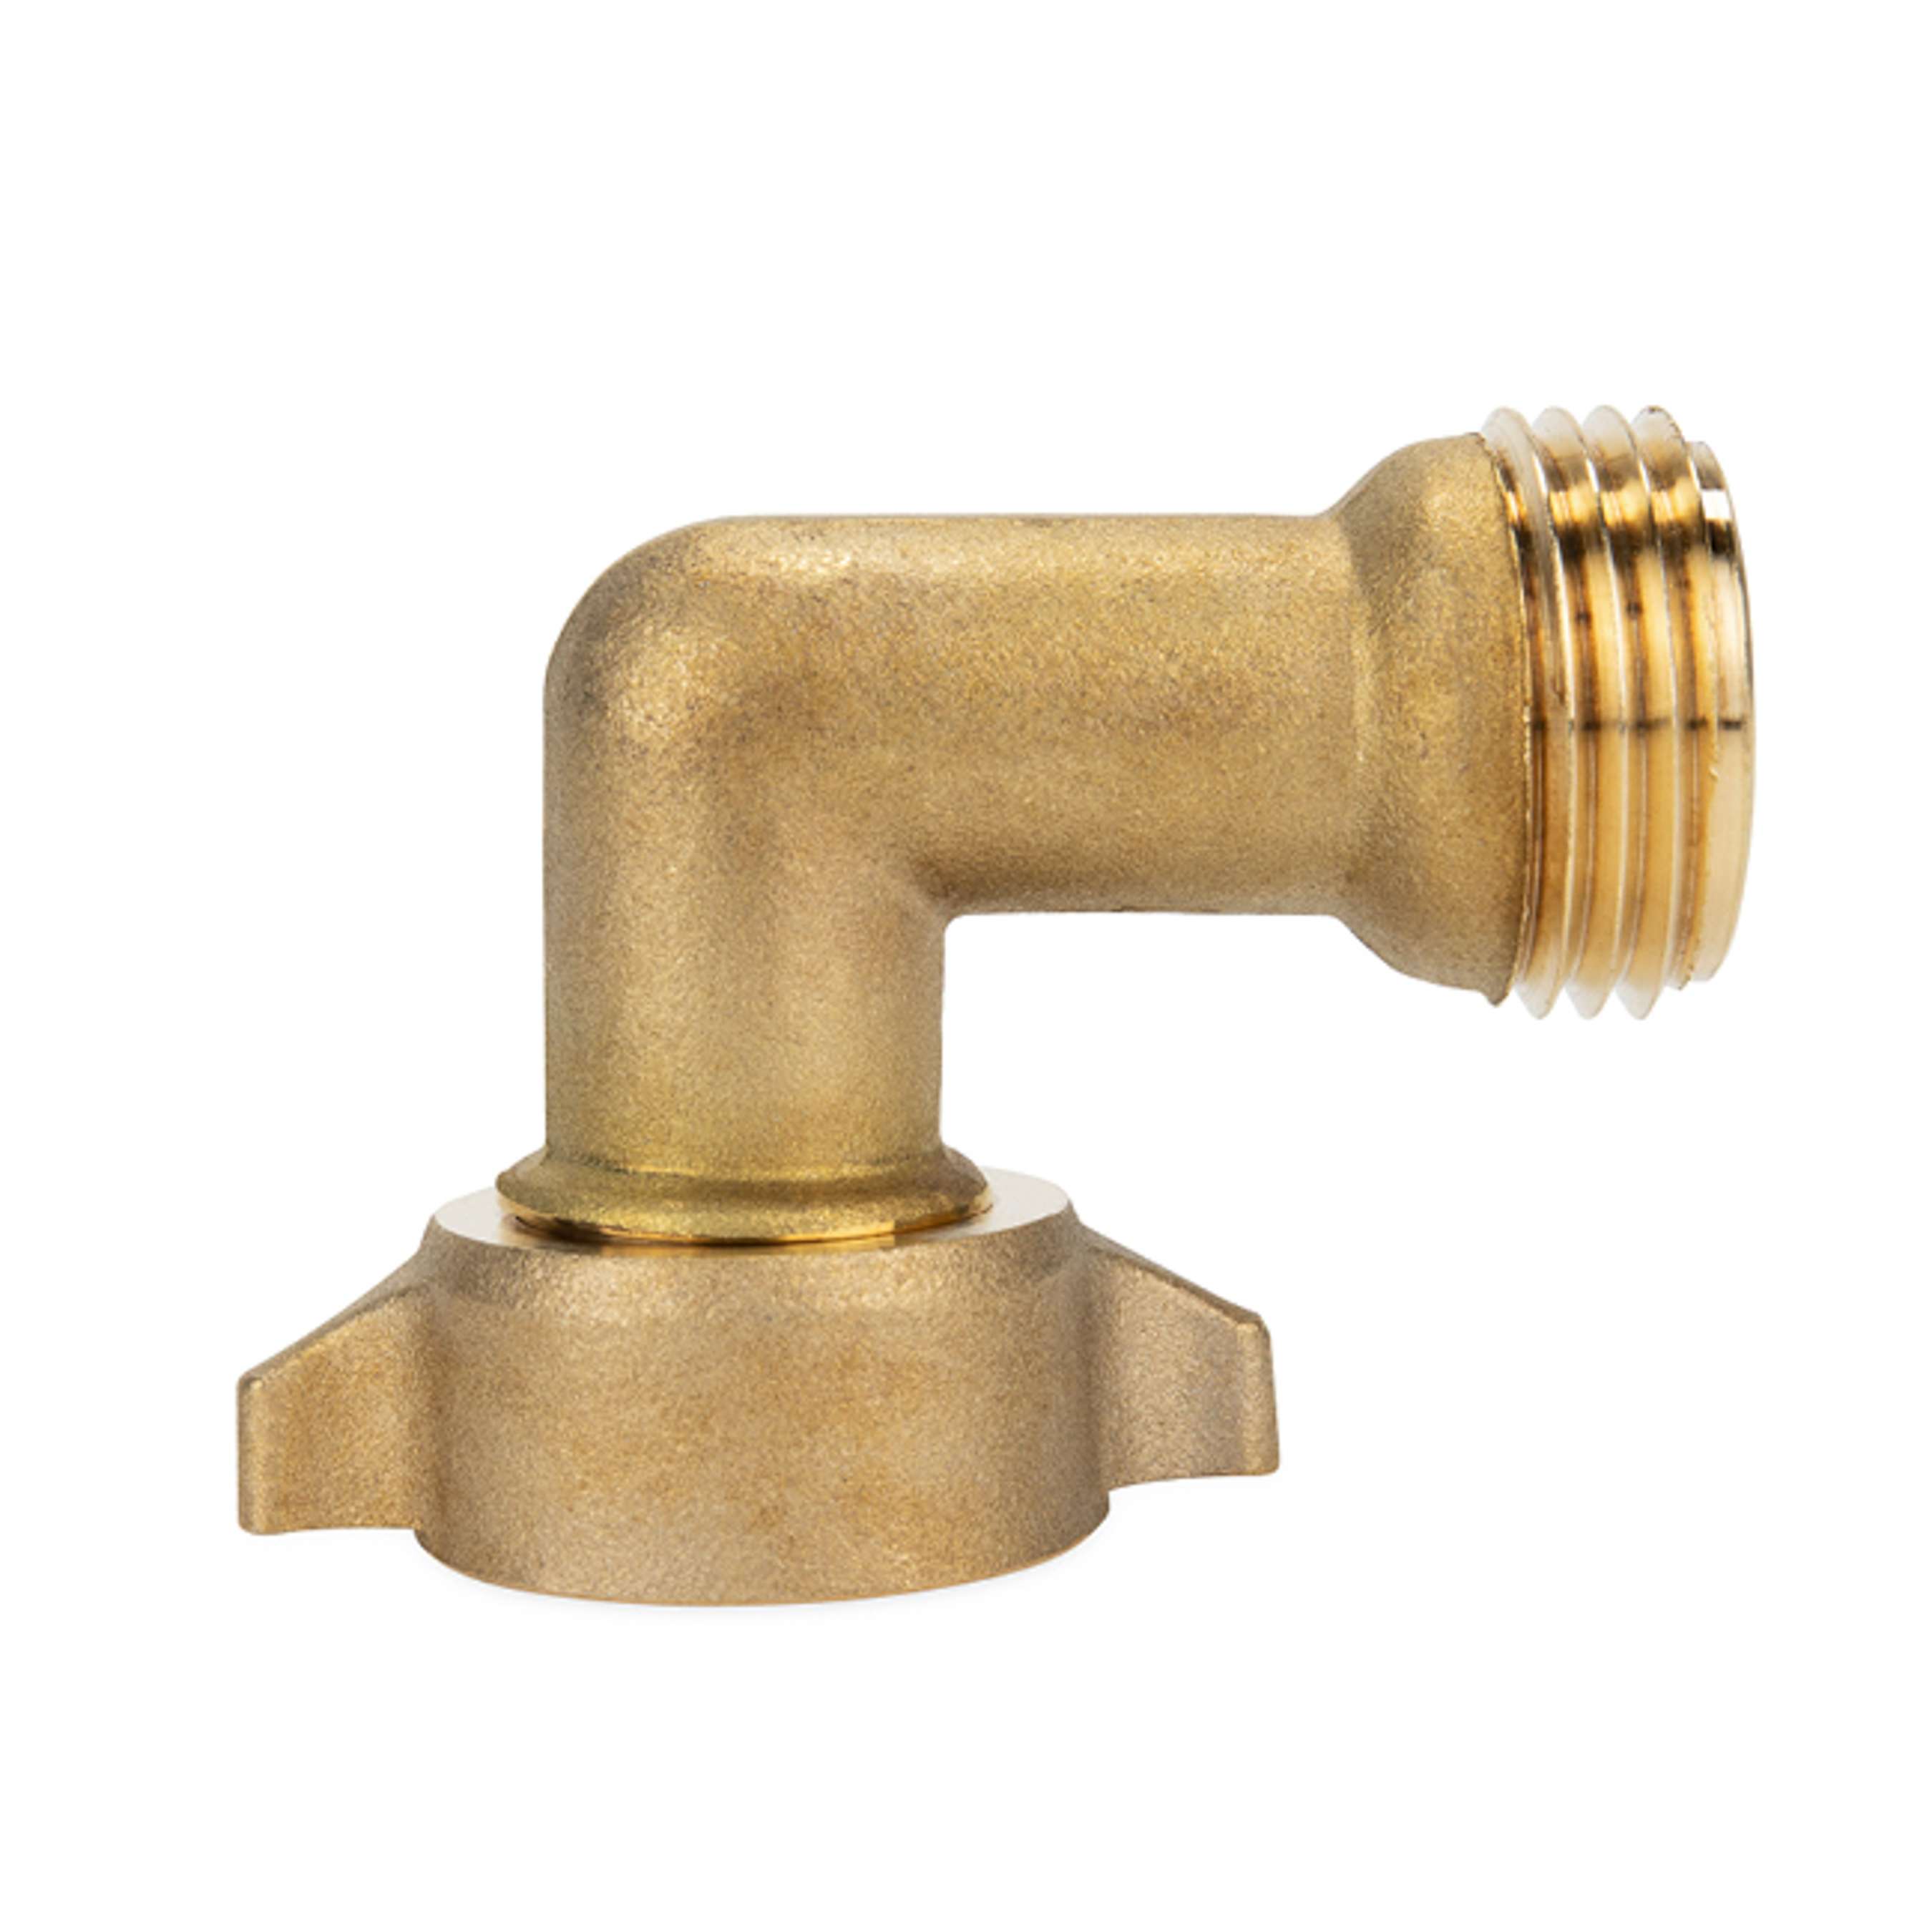 Camco 90-Degree Hose Elbow for RVs - Solid Brass Construction, Certified Lead-Free (22505) - image 1 of 6